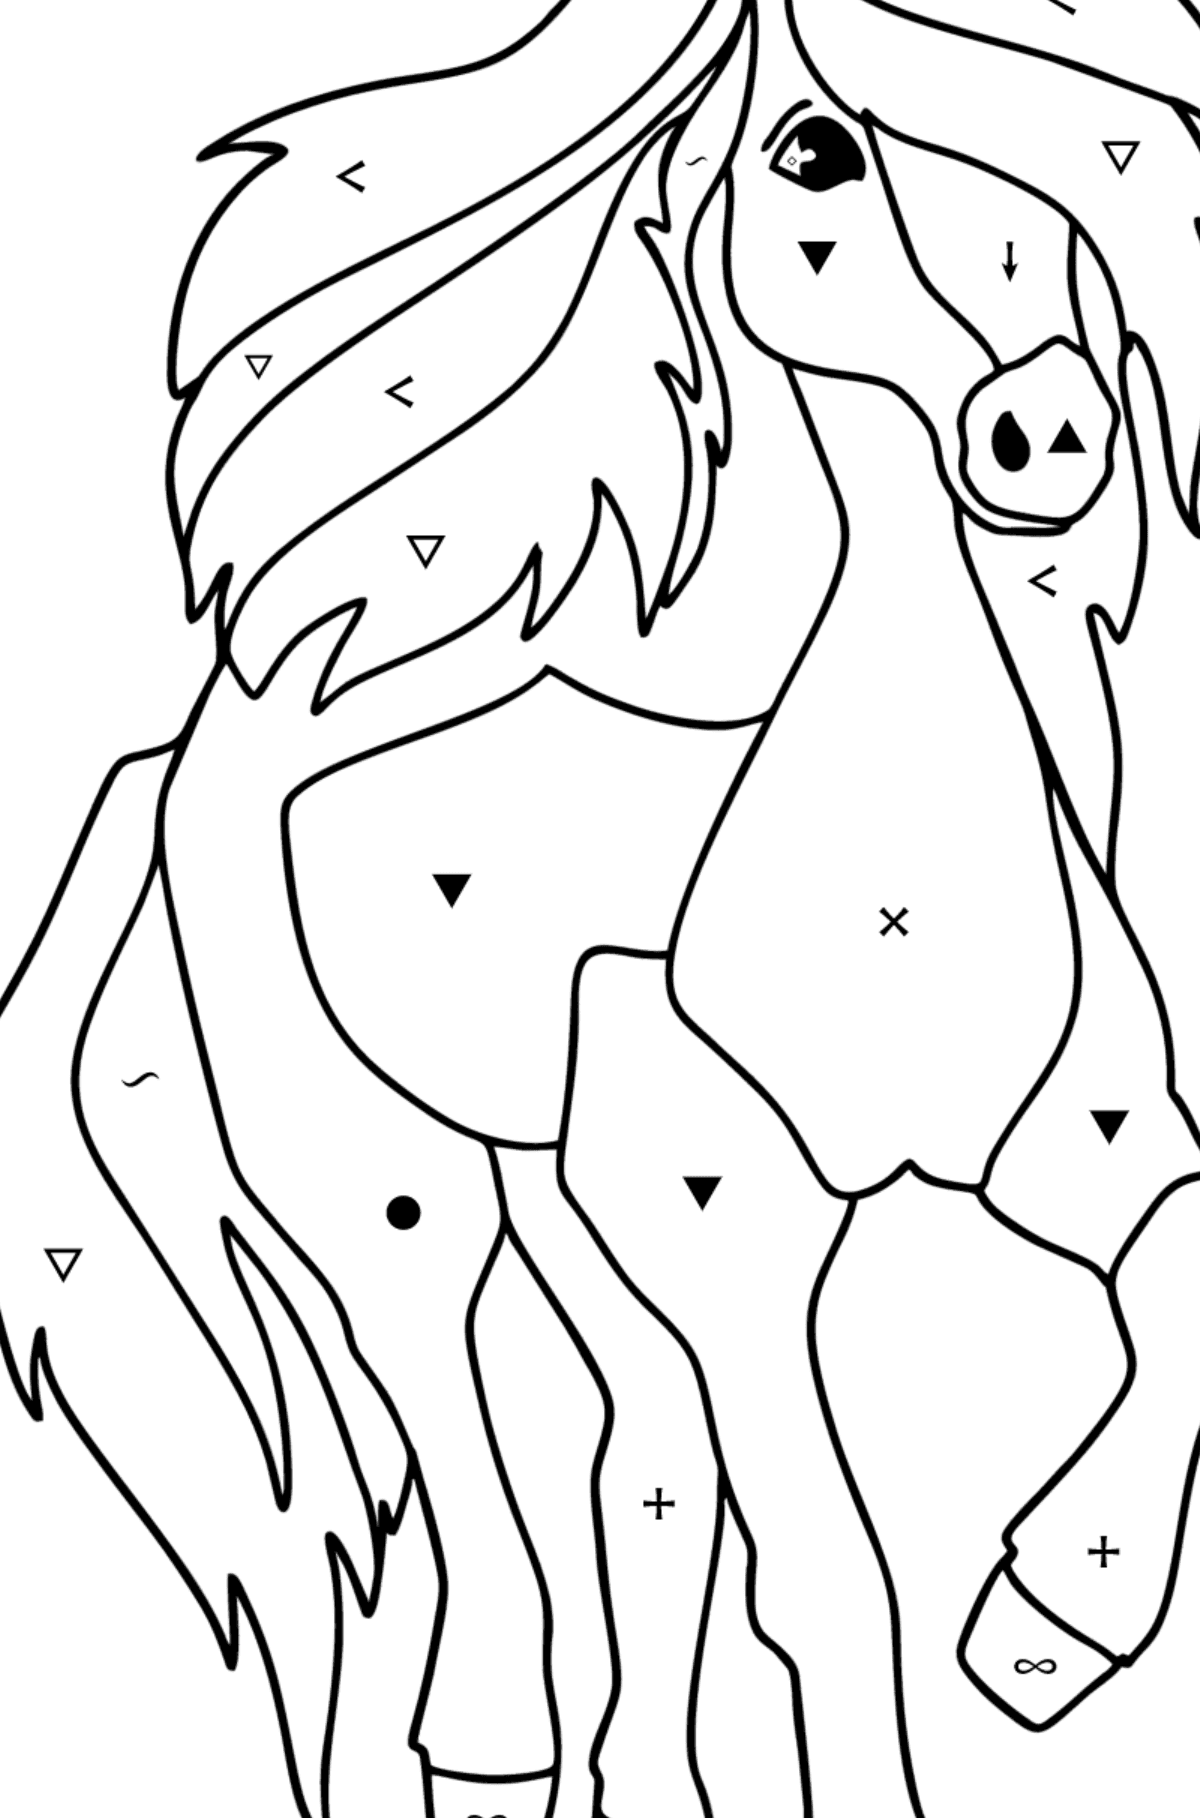 Simple horse сoloring page - Coloring by Symbols for Kids